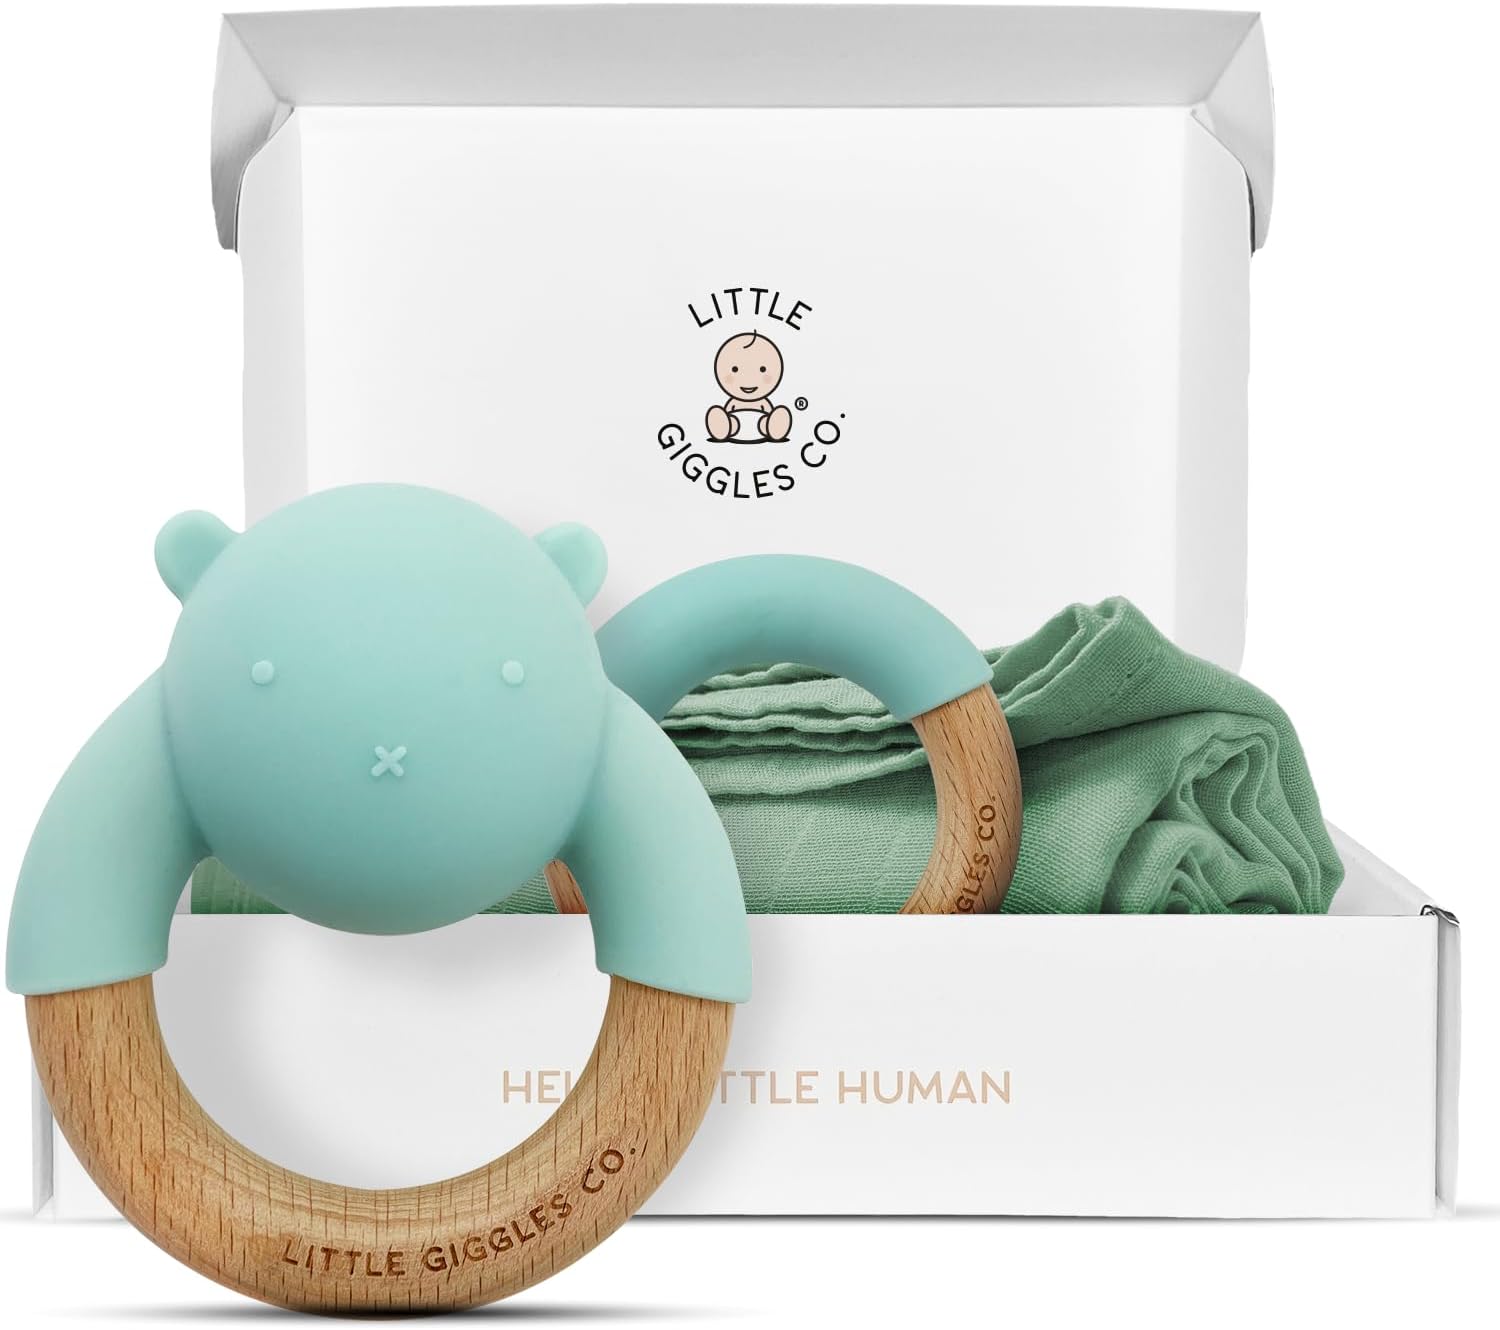 Little Giggles Co. Baby Gift - Teething Toys for Baby & Muslin Baby Blanket for Newborn. Baby Rattle & Teething Ring Baby Toys, Muslin Swaddle. Newborn Essentials, Mum to be Gifts for Baby Shower